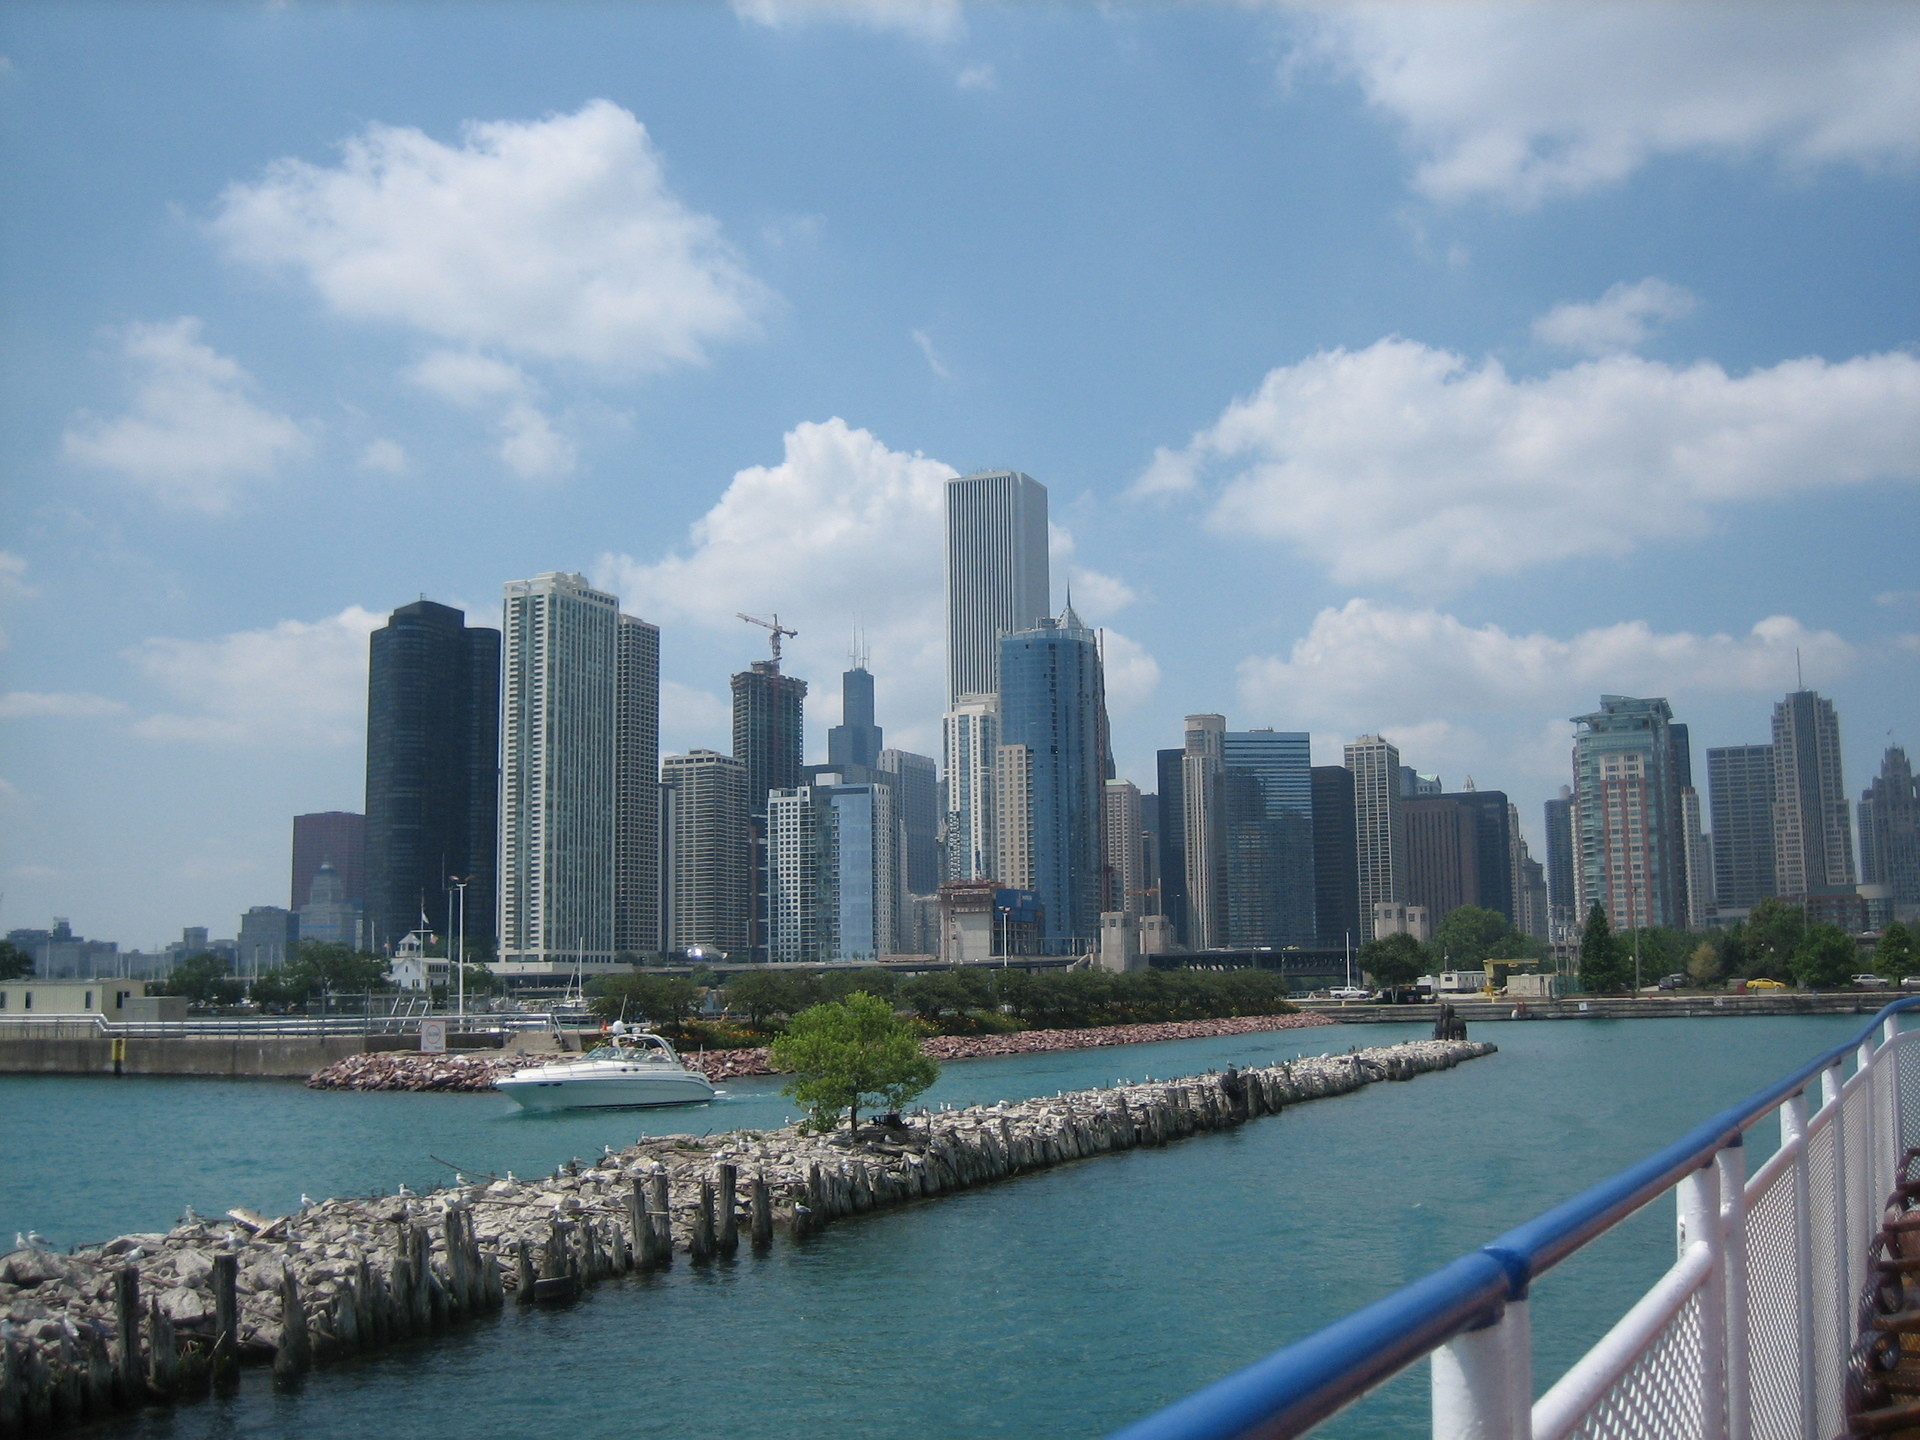 1920x1440 Chicago images Chicago Skyline HD wallpaper and background photos